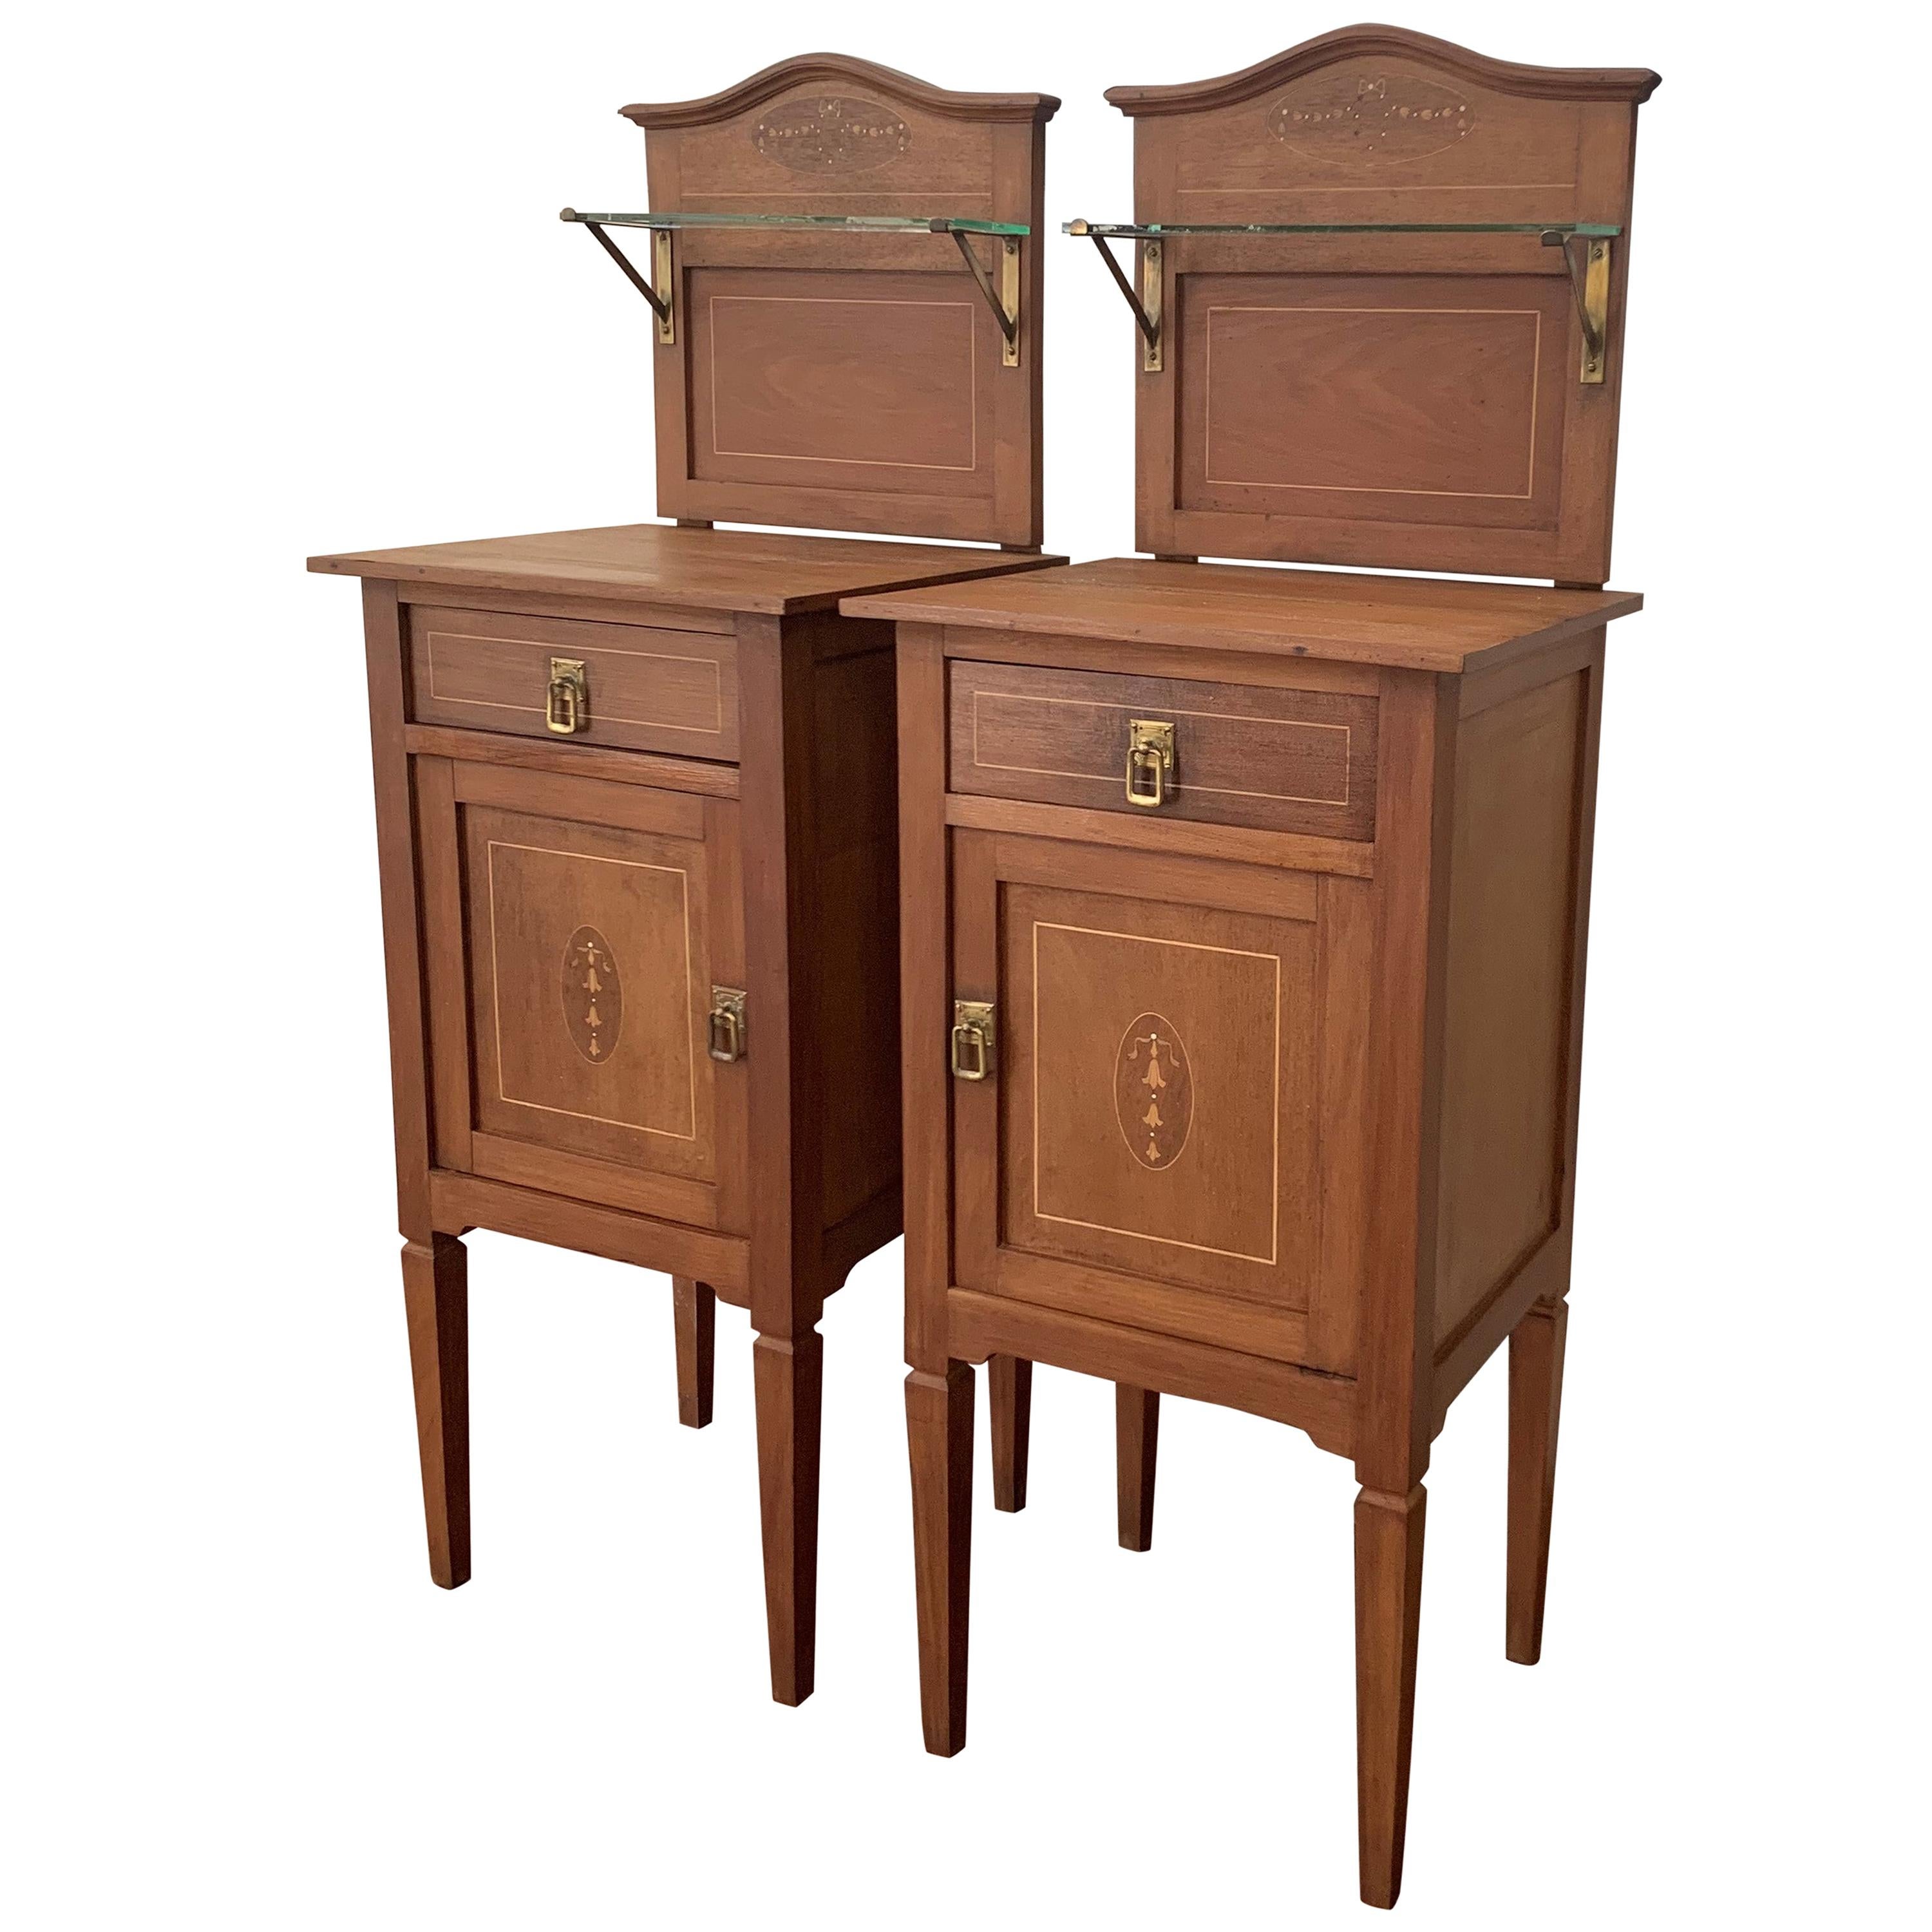 1900s, Art Nouveau Pair of Walnut Nightstands with Crest and Glass Shelve For Sale